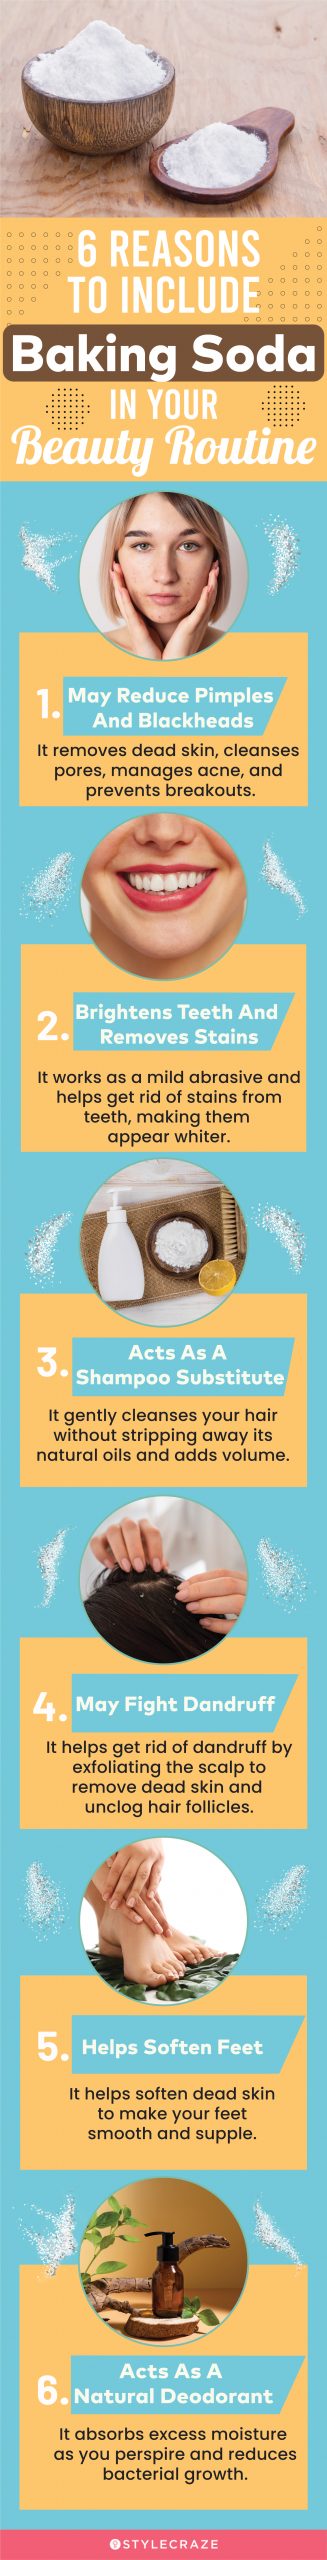 6 reasons to include baking soda in your beauty routine (infographic)